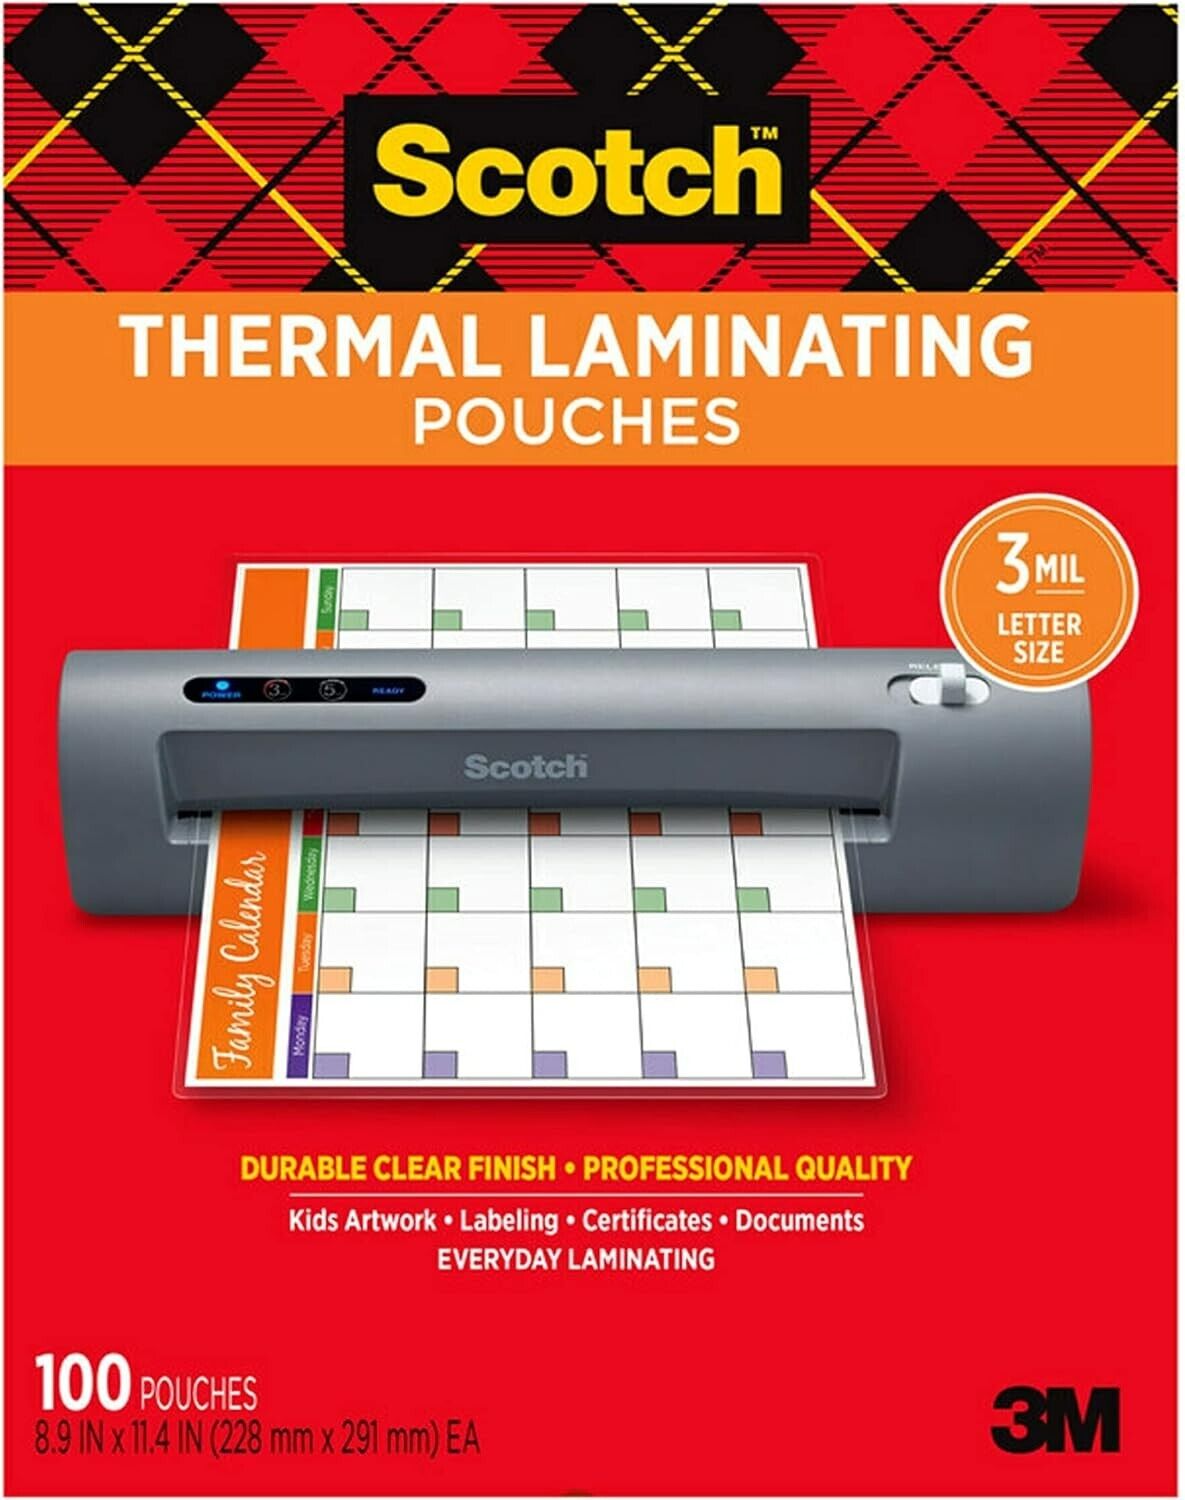 Scotch Thermal Laminating Pouches, 8.9 x 11.4", pack of 100